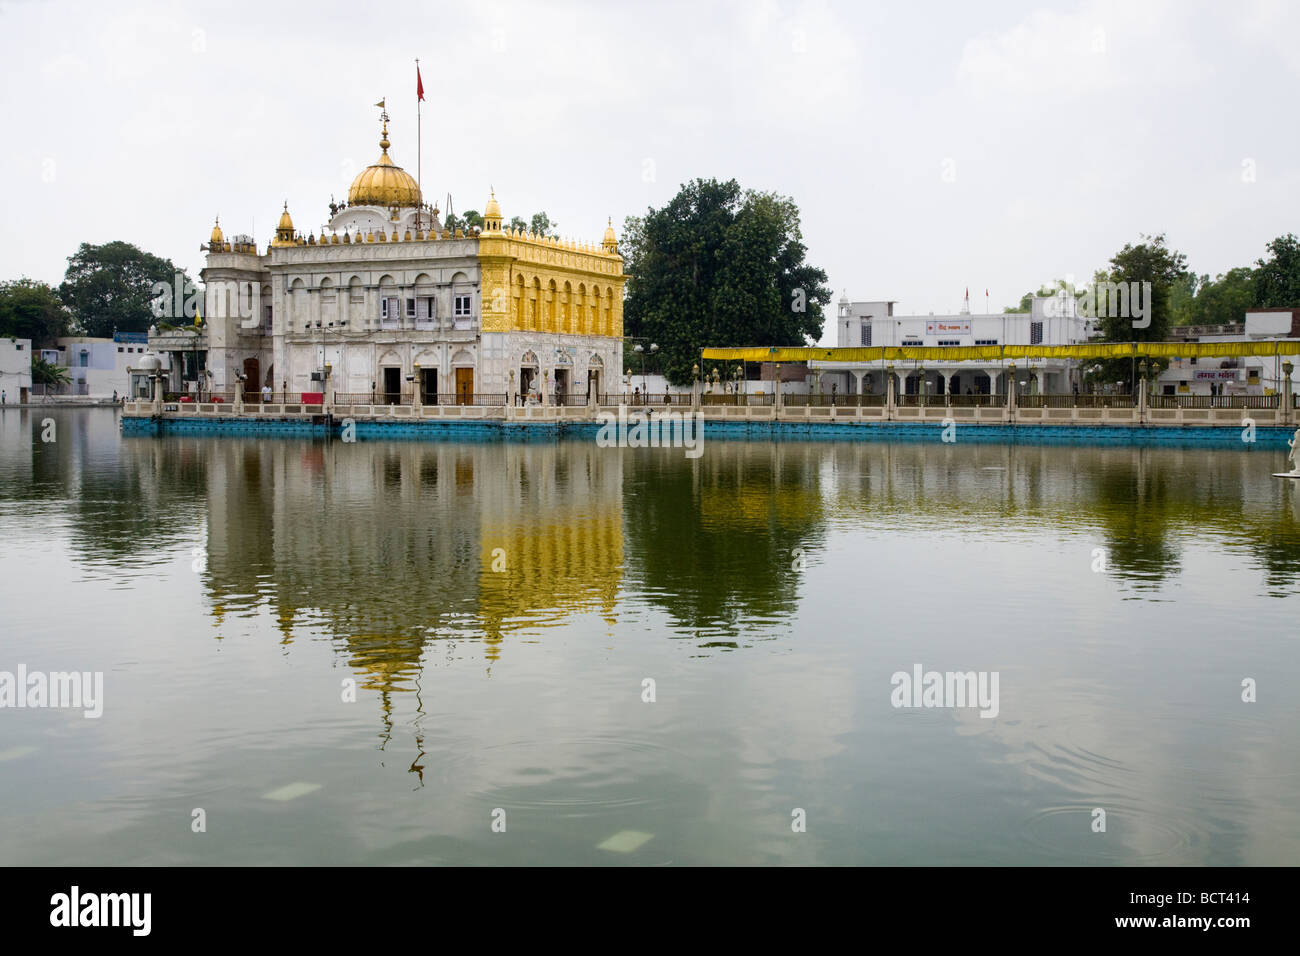 Sri Durgiana Hindu Temple, built in the style of the Sikh's Golden Temple, with a water tank and domed shrine. Amritsar. India Stock Photo